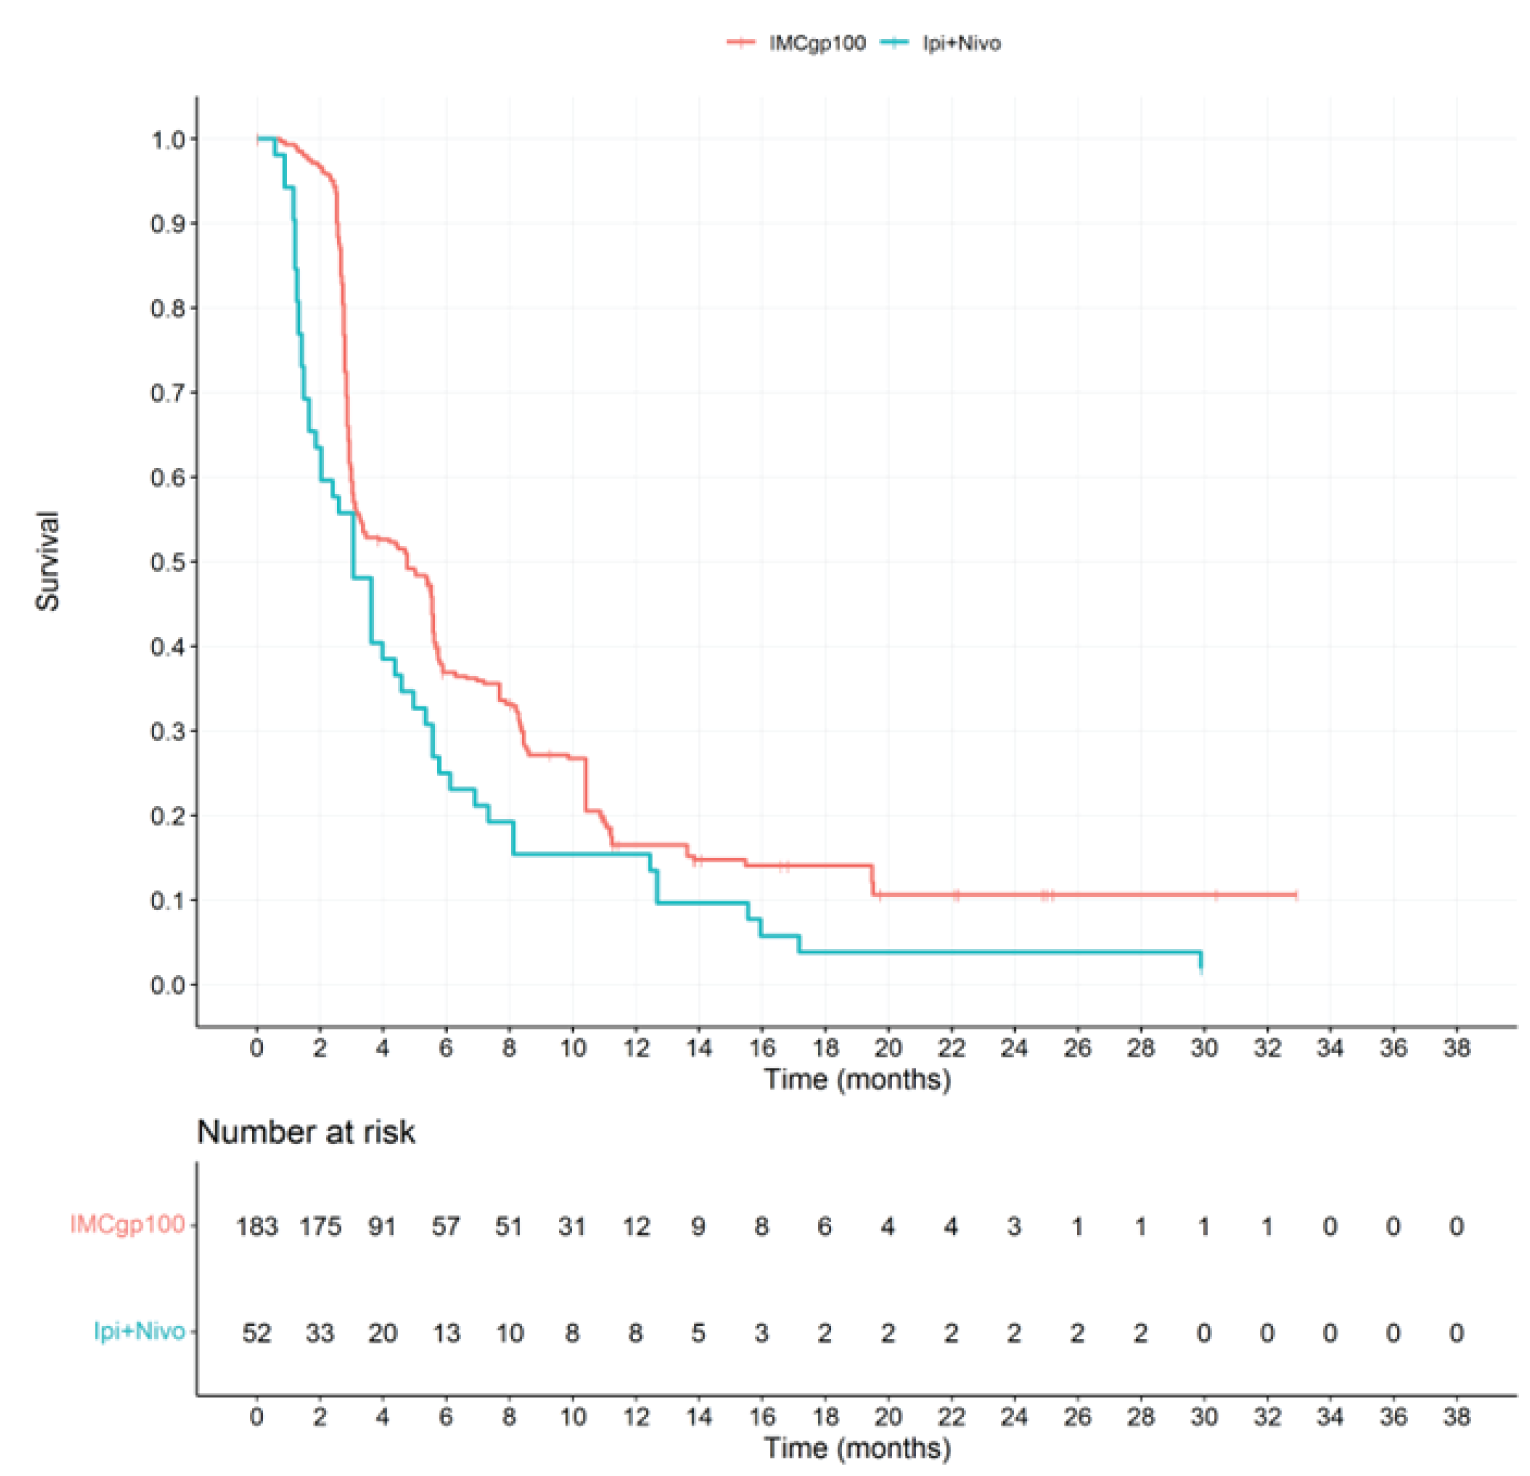 KM plot of PFS for tebentafusp (index trial) and ipilimumab + nivolumab (comparator trial) from 0 to 33 months of follow-up. The curves converge at approximately 3 months and then diverge, with tebentafusp above ipilimumab + nivolumab. The curves remain separated until approximately month 12, when they converge again. The curves then diverge and tebentafusp eventually plateaus at a PFS probability of 10% at 20 months and ipilimumab + nivolumab plateaus at a PFS probability of 5% at 17 months.